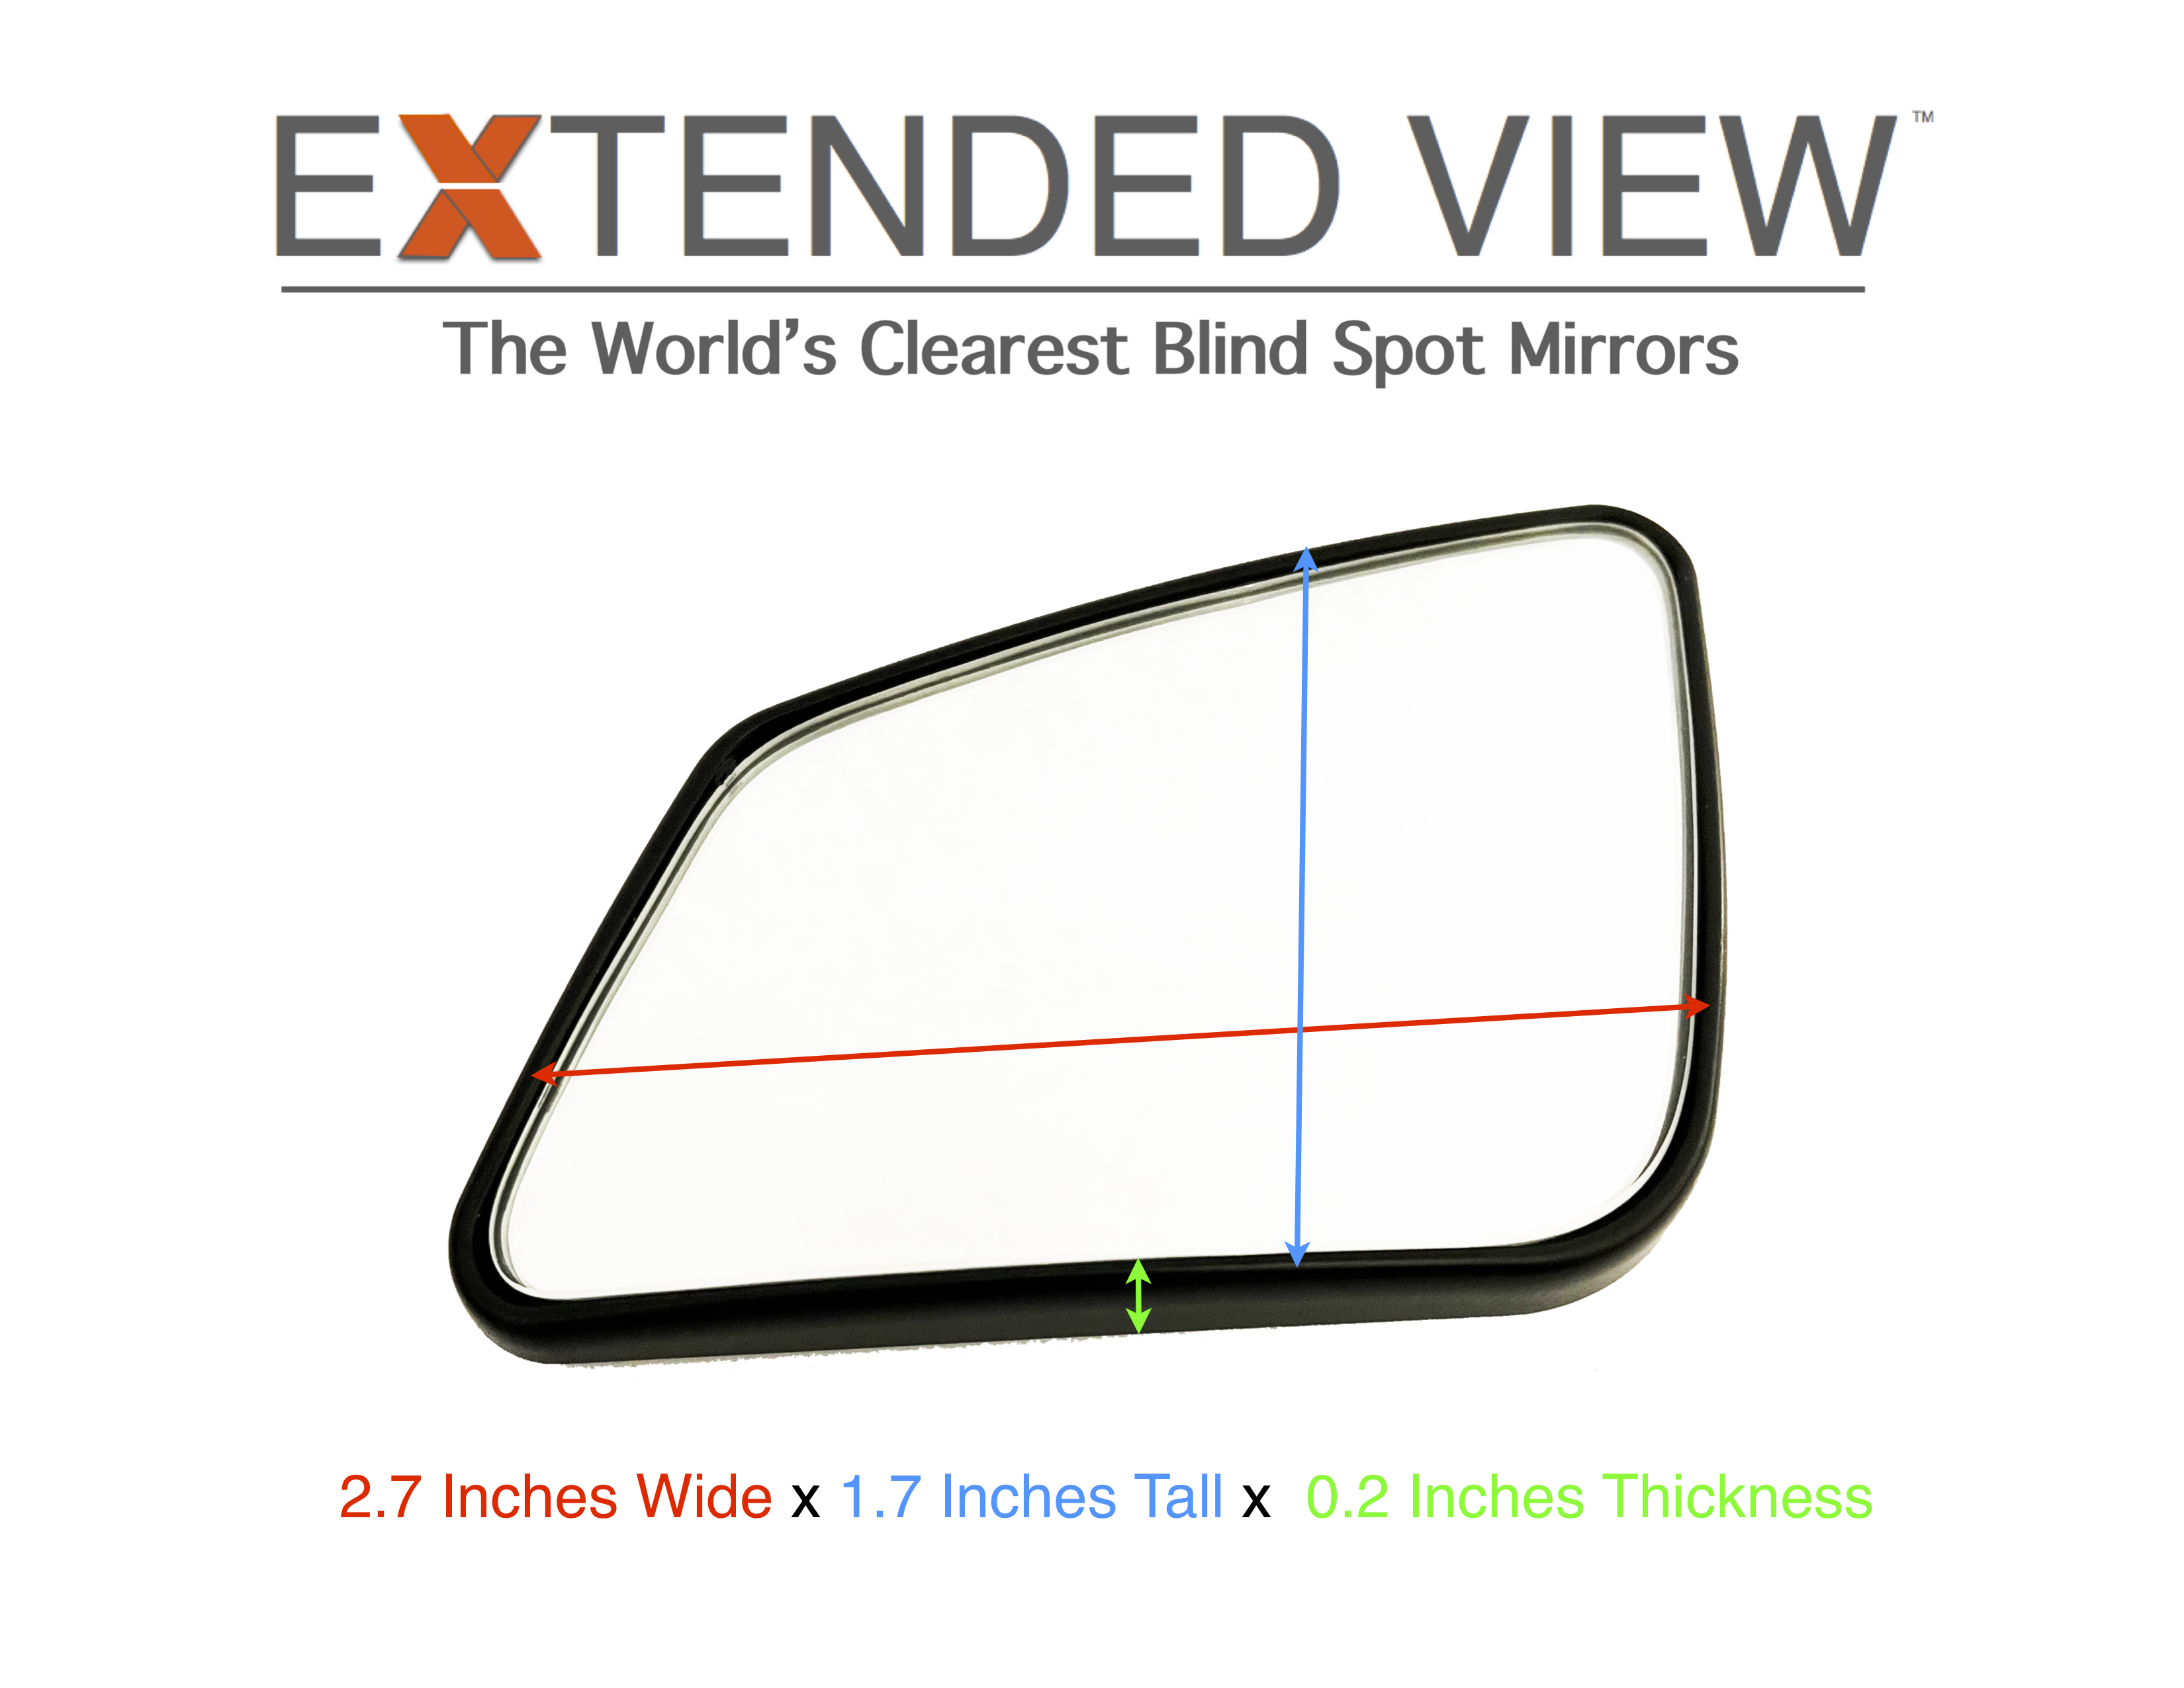 BMW M6 Coupe Blind Spot Mirrors | Blind Spot Mirrors | Extended View™